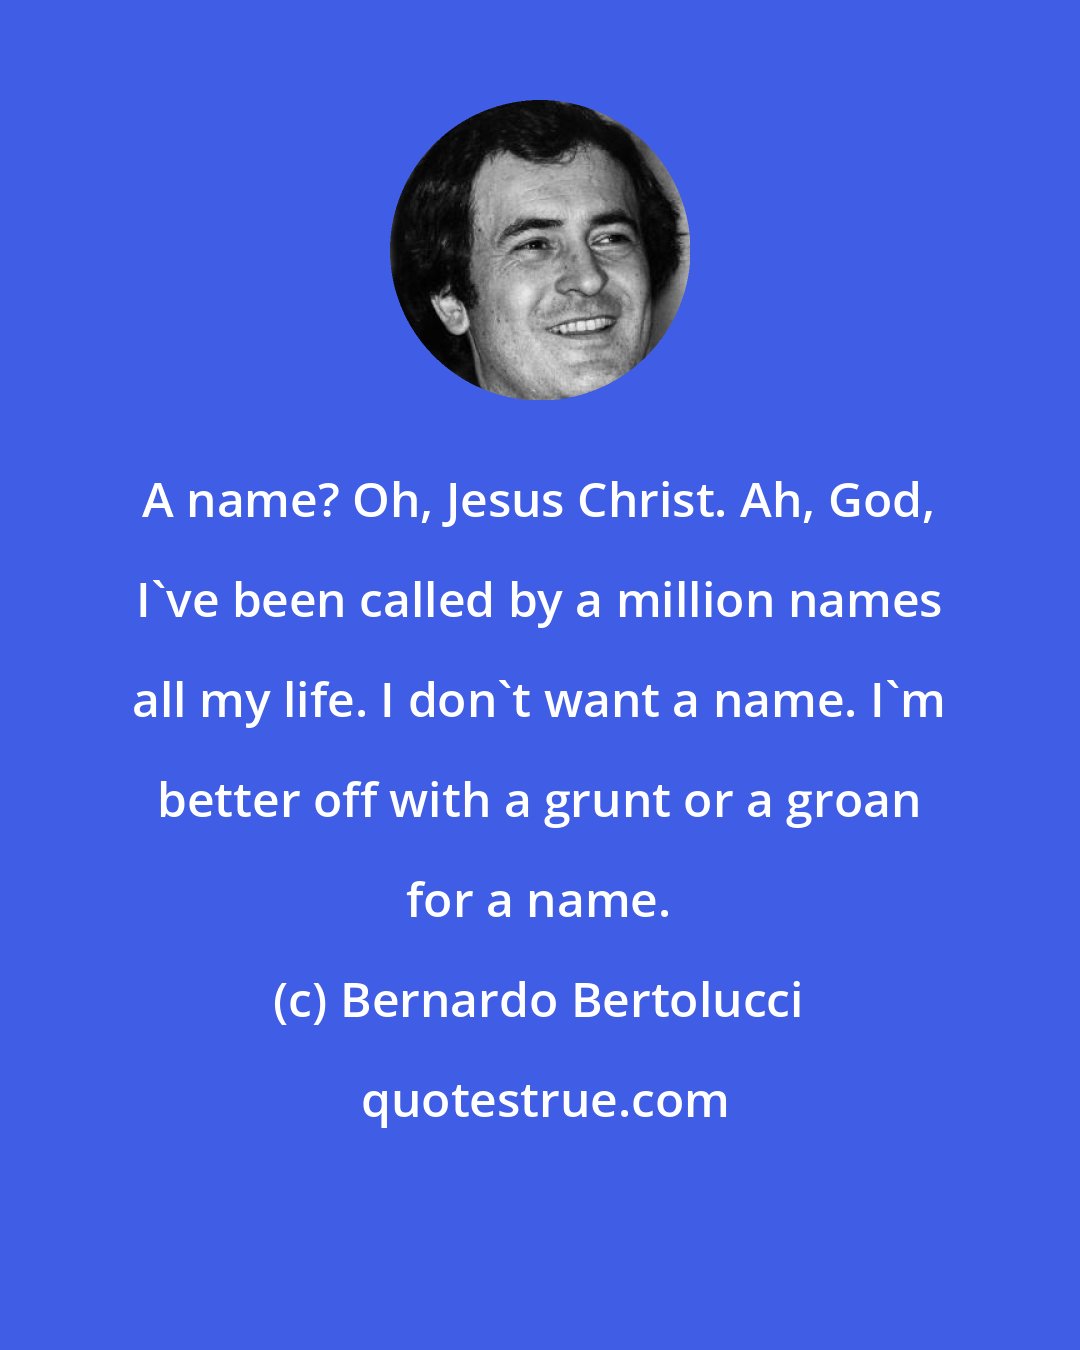 Bernardo Bertolucci: A name? Oh, Jesus Christ. Ah, God, I've been called by a million names all my life. I don't want a name. I'm better off with a grunt or a groan for a name.